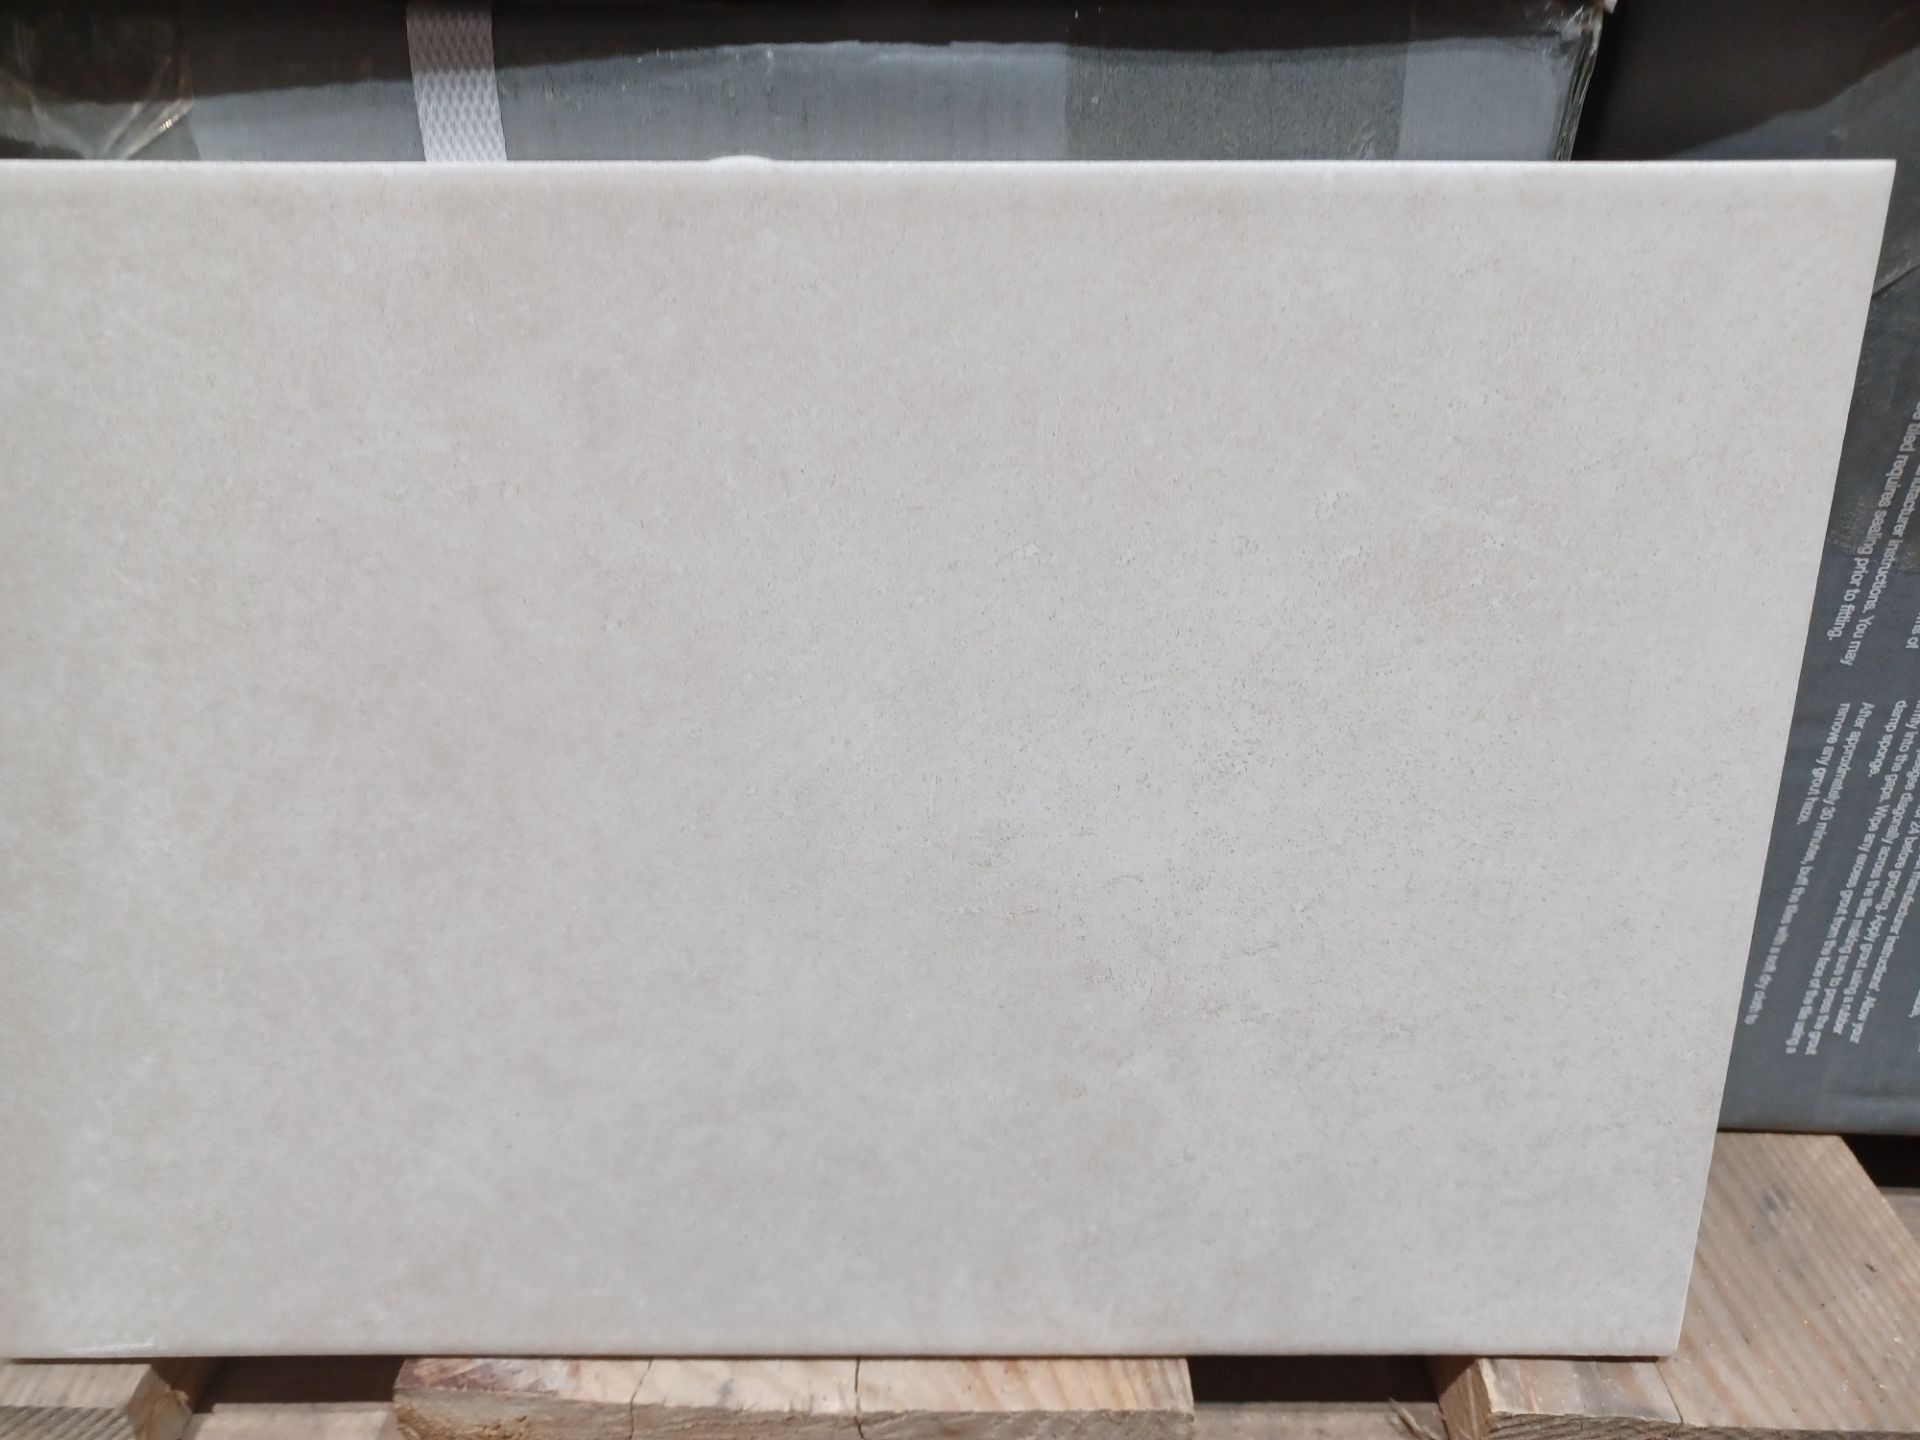 10 X PACKS OF JOHNSONS TILES CNY WALL OLD STONE 297x197MM WALL TILES. EACH PACK COVERS 1M2, GIVING - Image 2 of 2